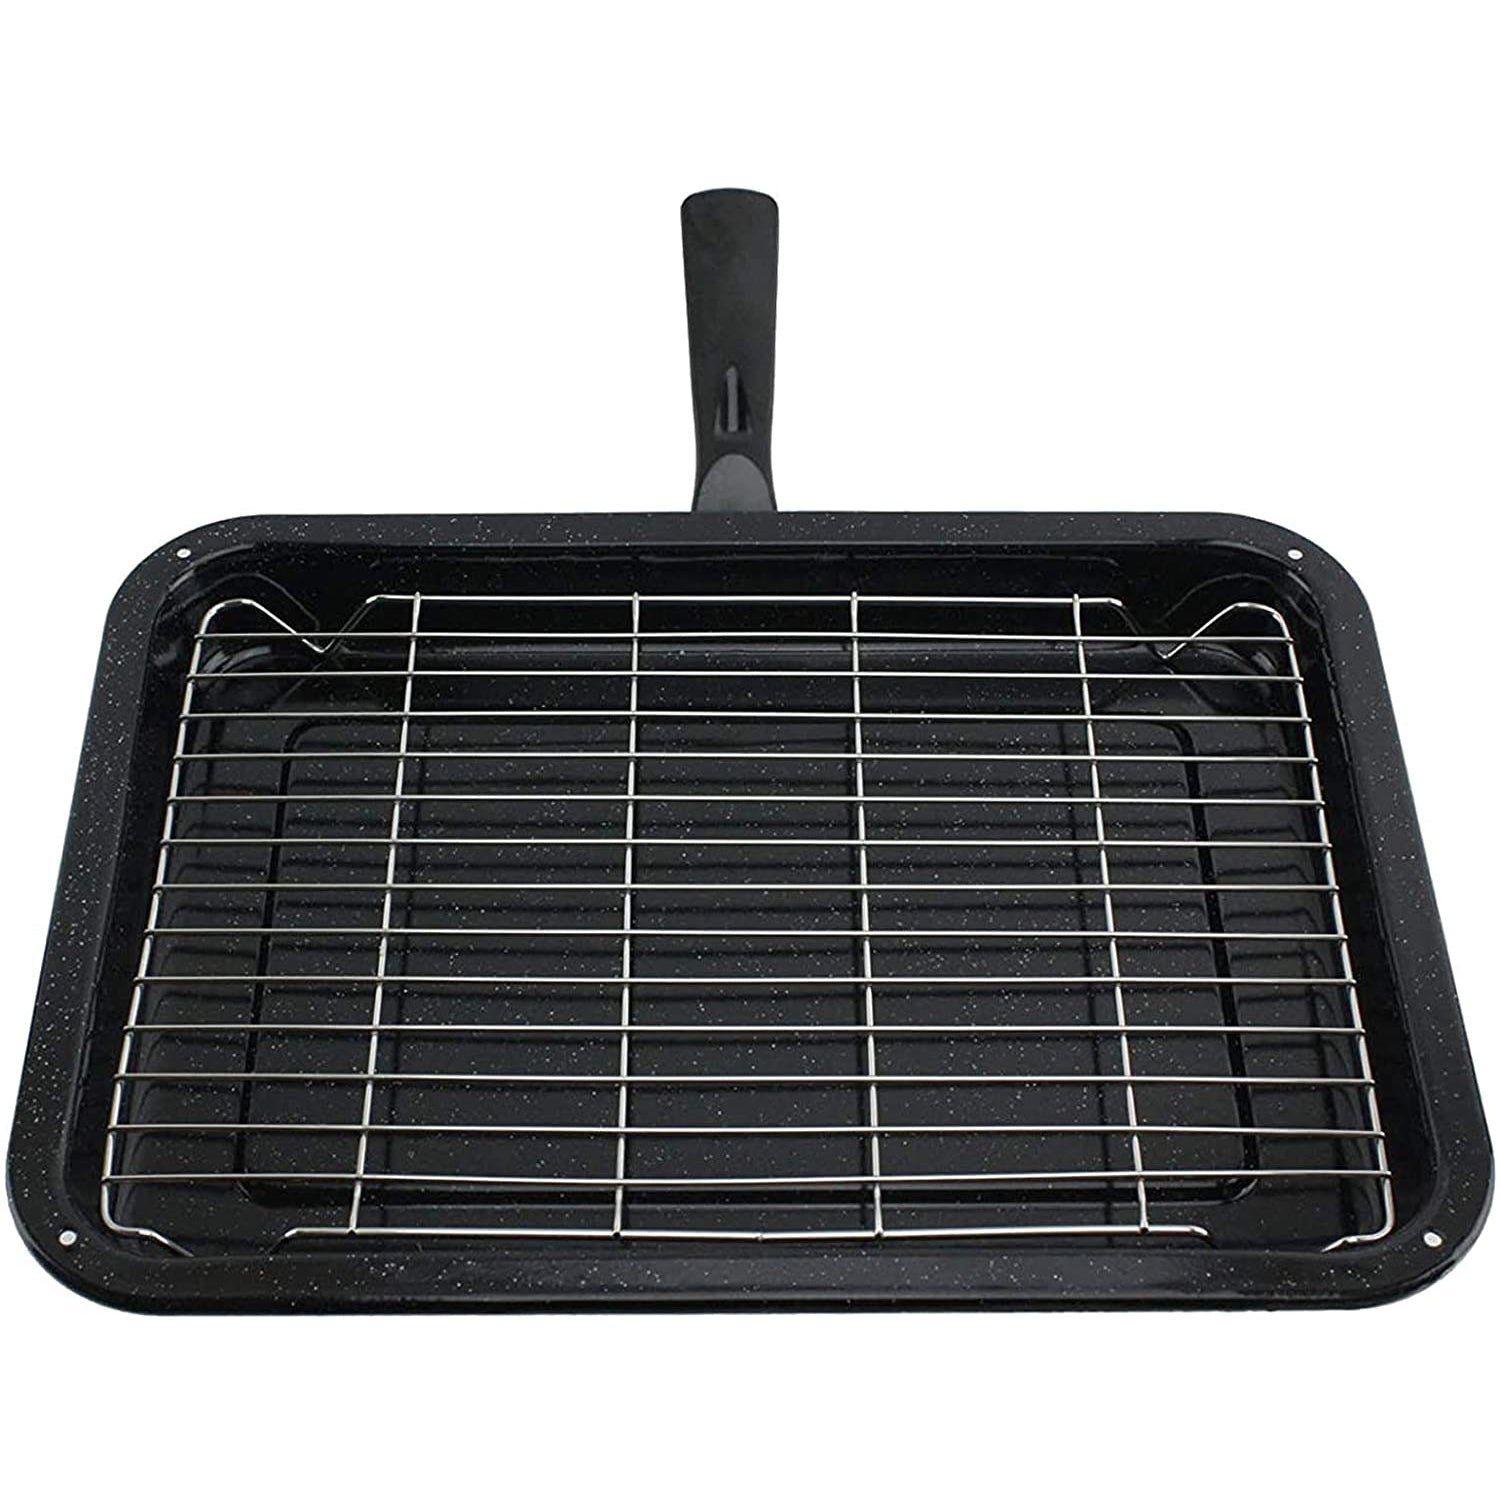 Small Grill Pan + Rack and Detachable Handle for BOSCH Oven Cooker